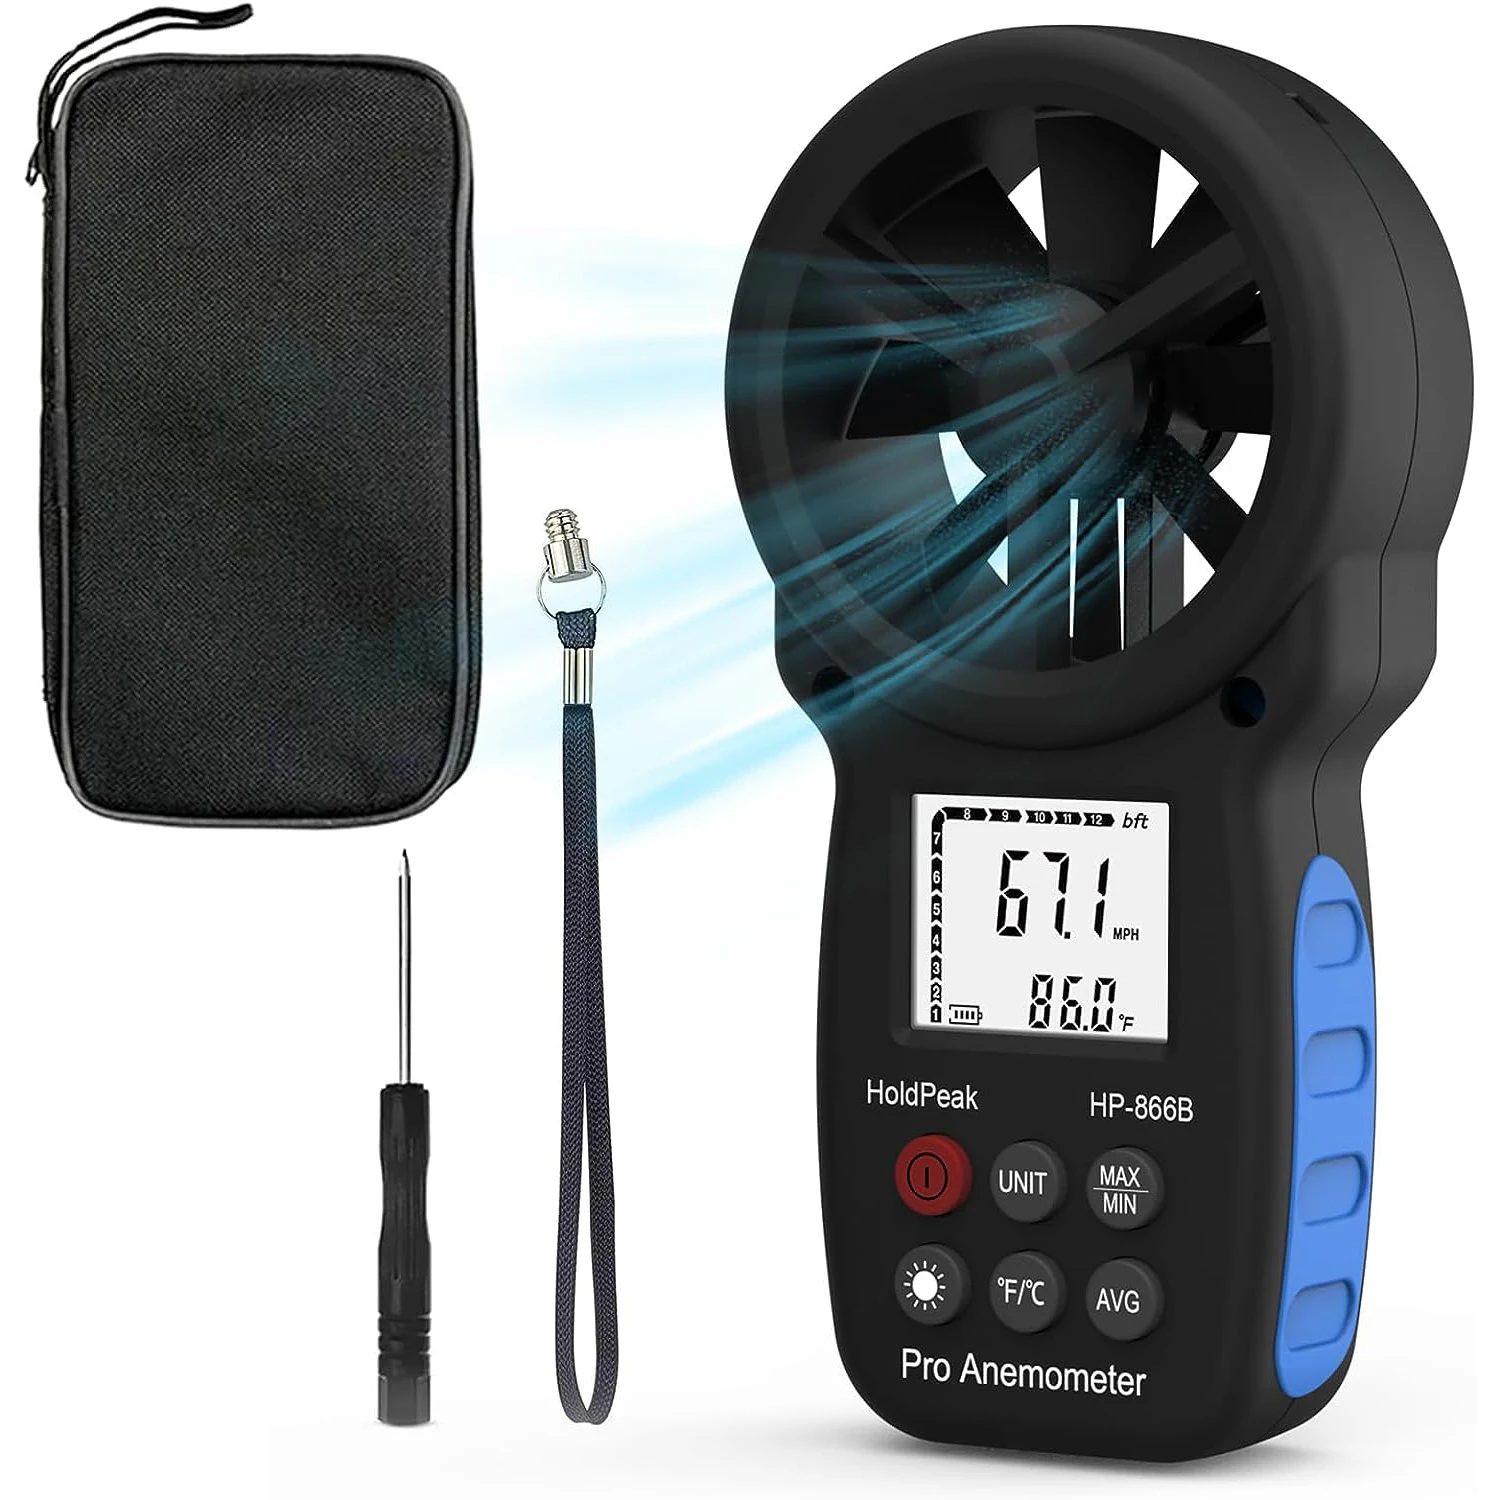 HoldPeak HP-866B Digital Anemometer Handheld Wind Speed Meter for Measuring Wind Speed Temperature and Wind Chill with Backlight